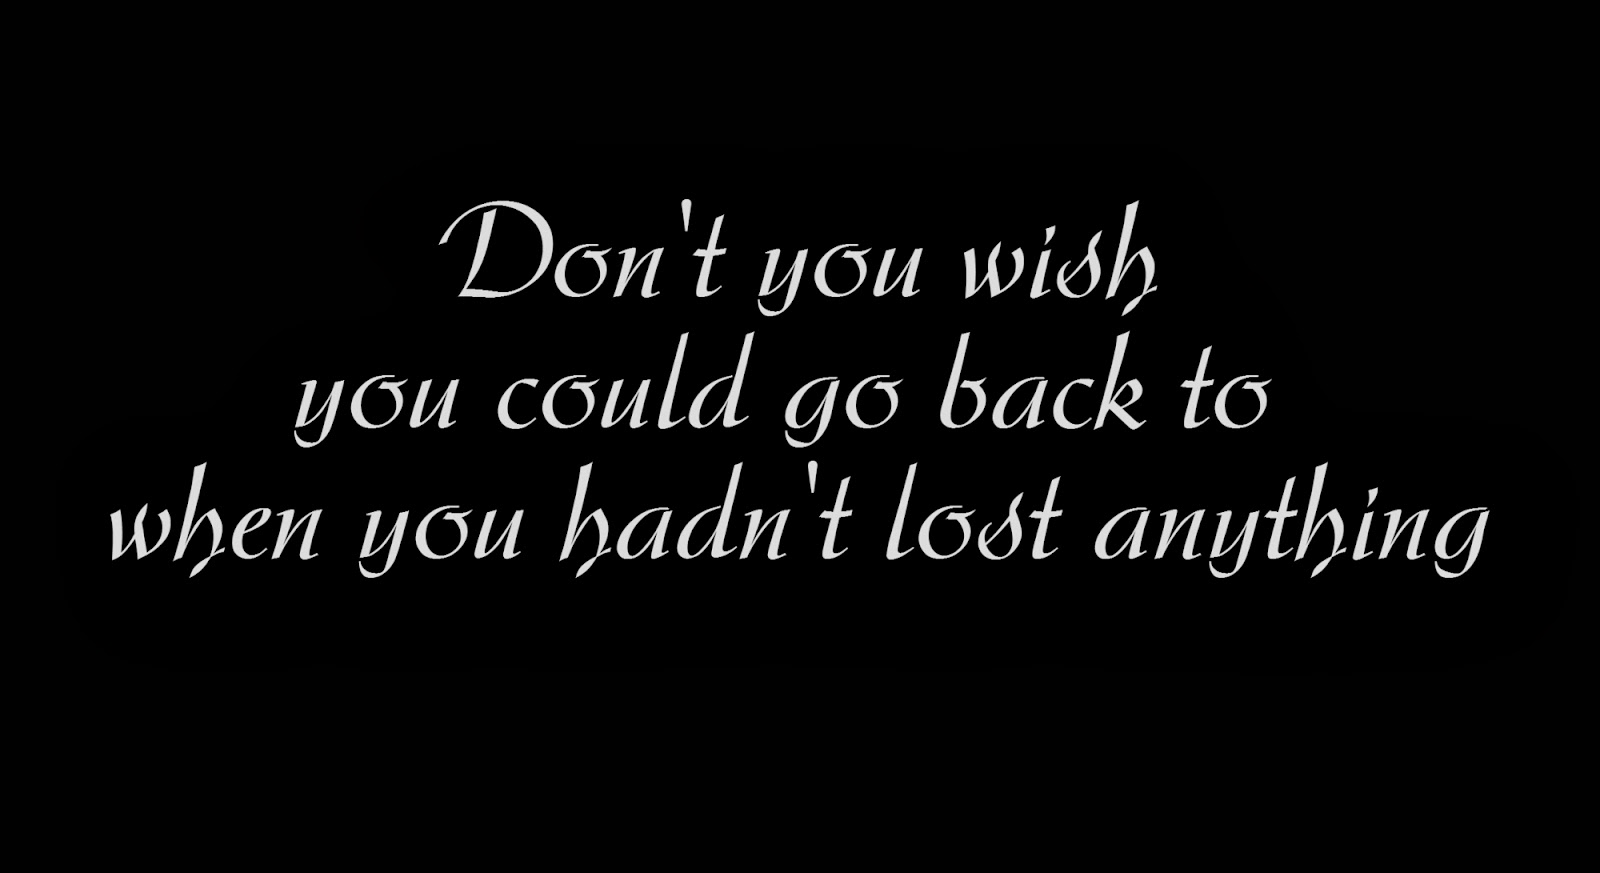 Don't you wish you could go back to when you hadn't lost anything